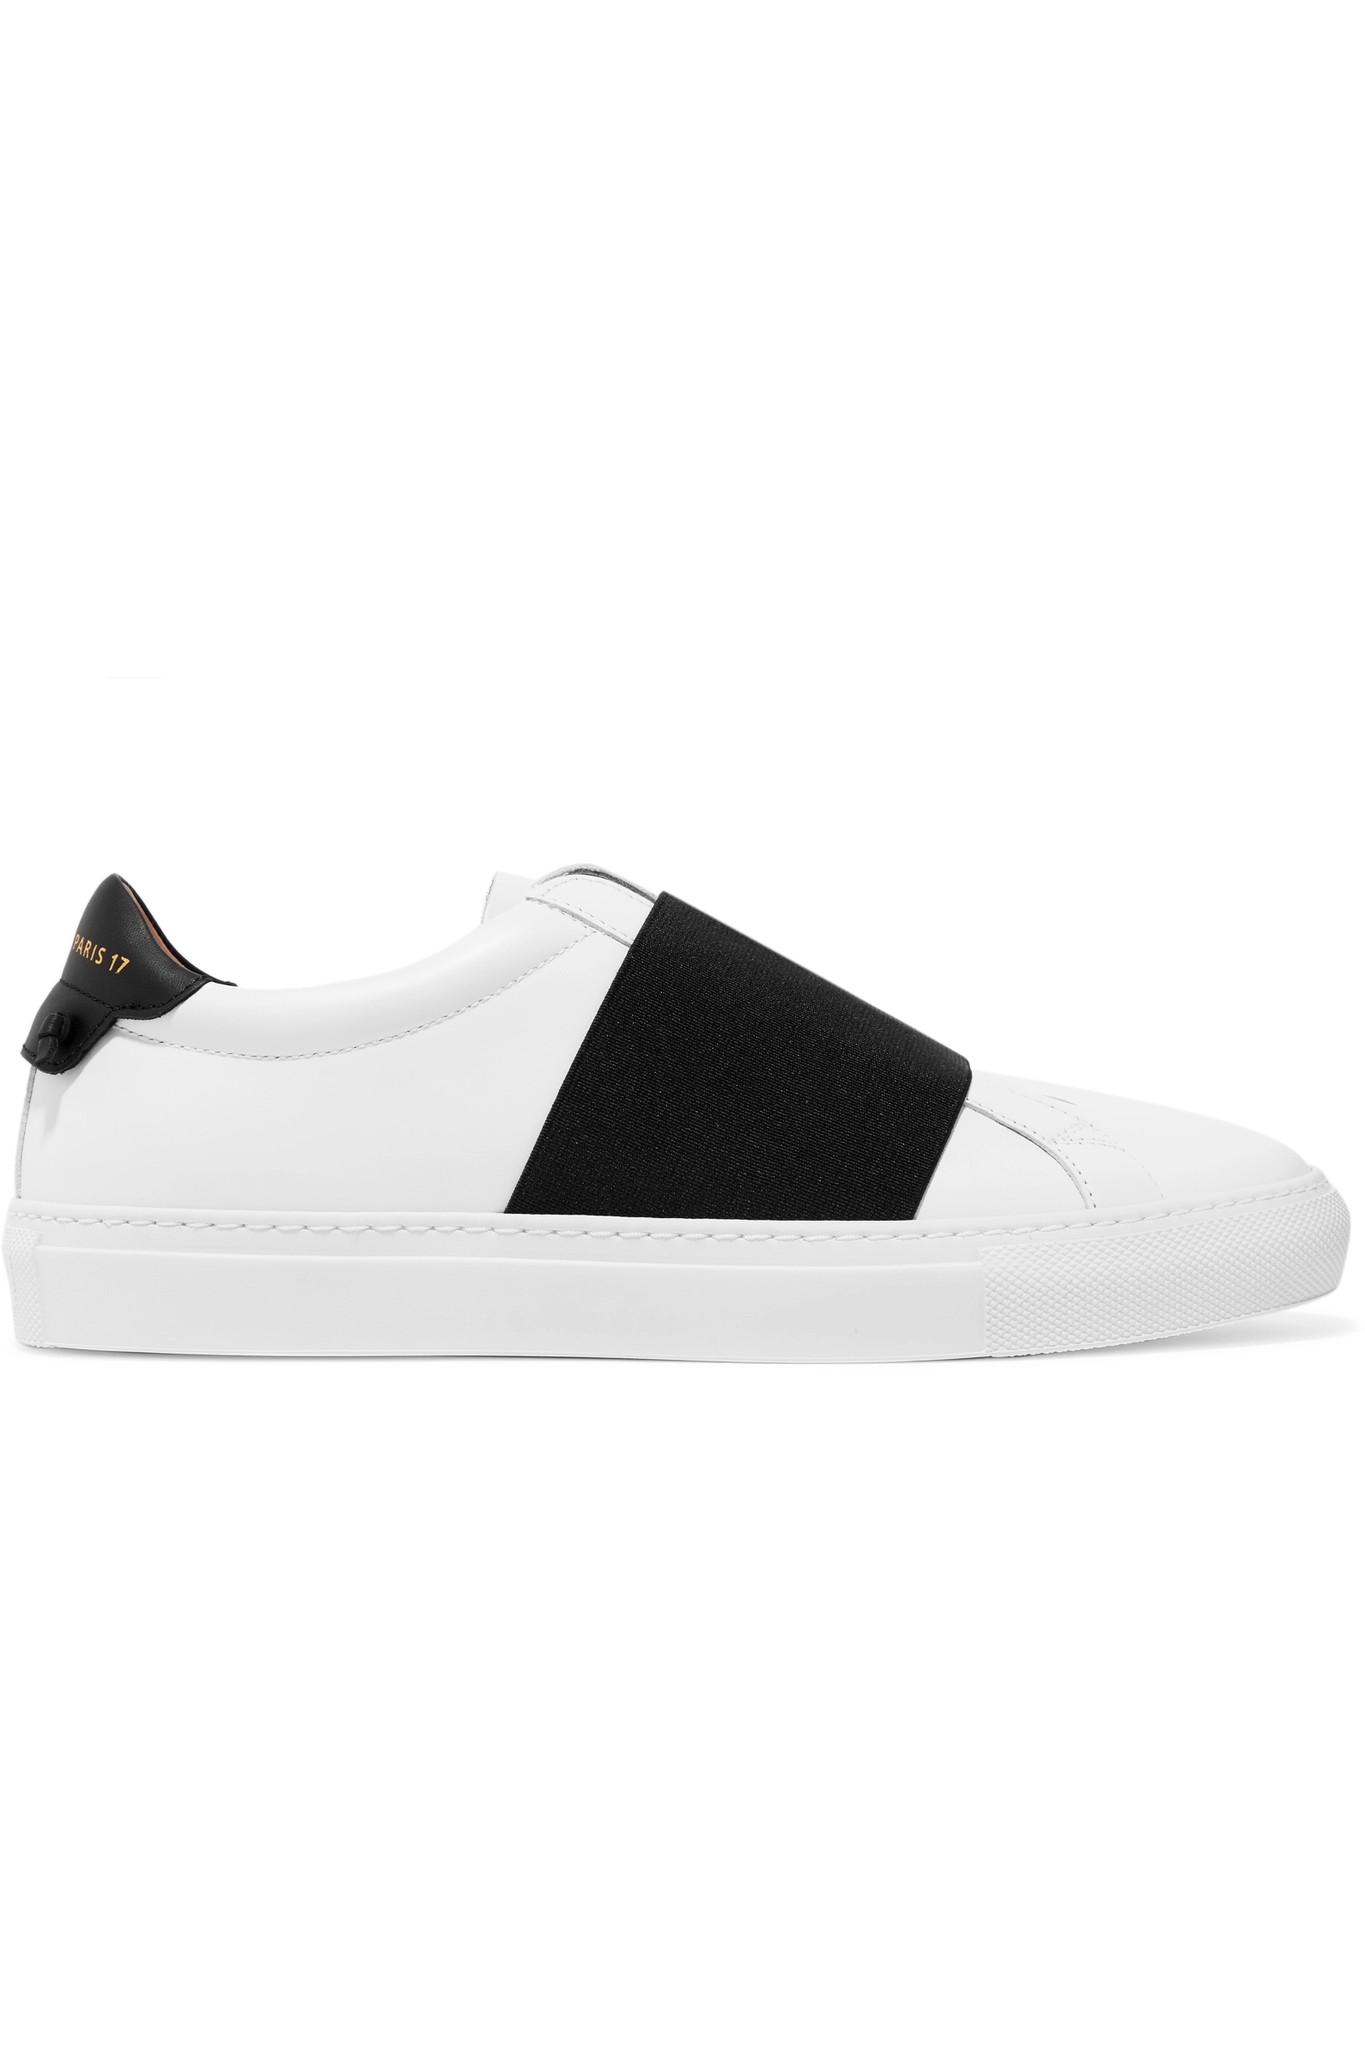 Givenchy Elastic-trimmed Leather Sneakers in White | Lyst